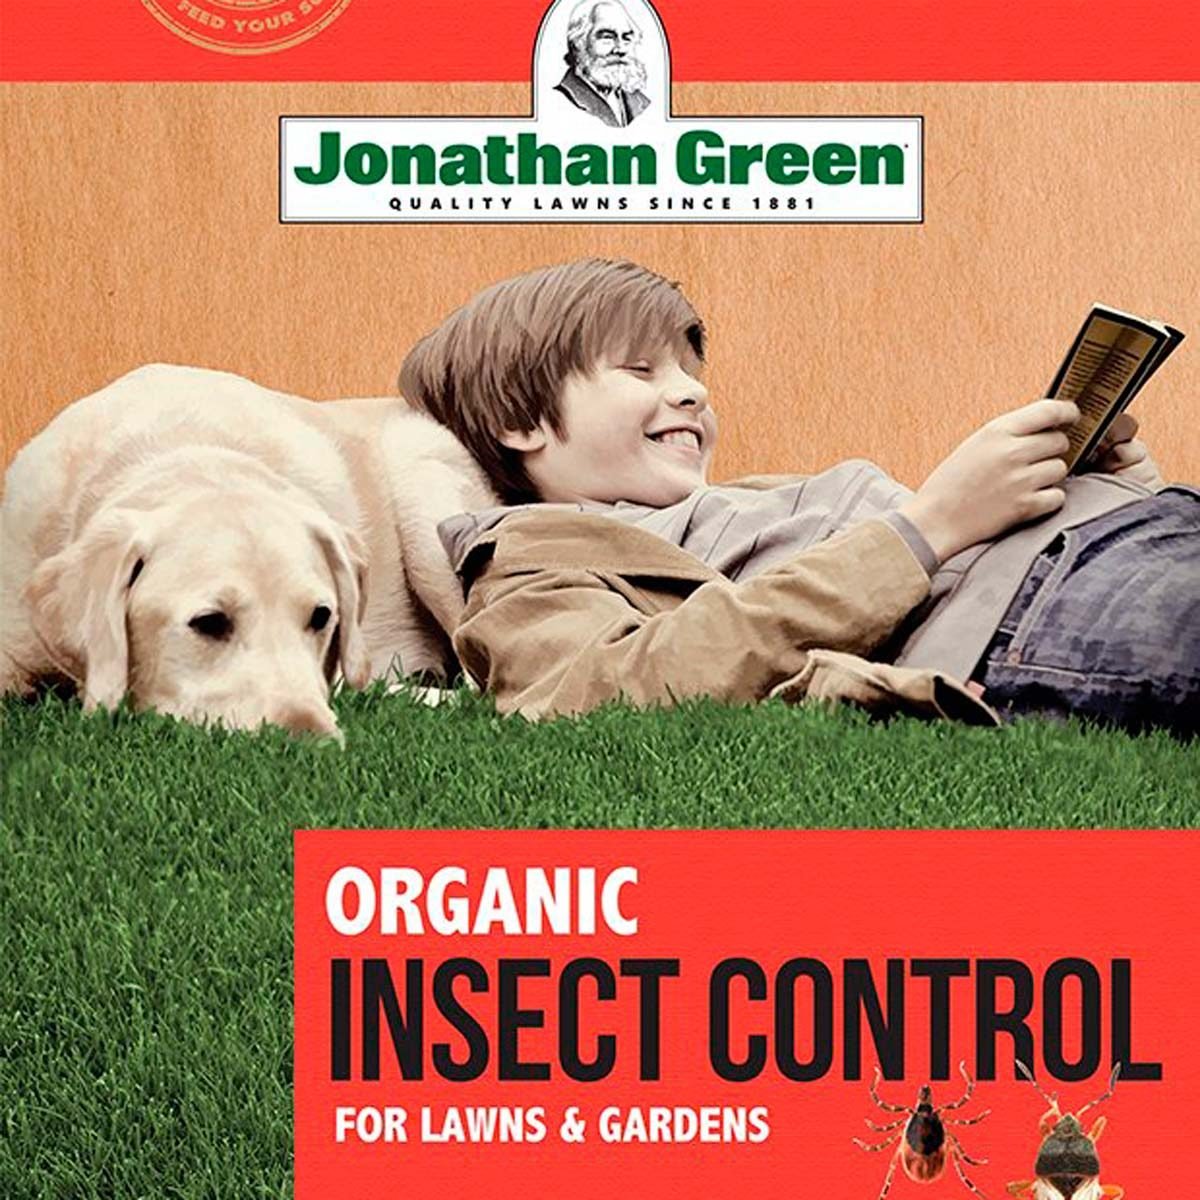 10 Earth Friendly Lawn Care Products to Buy